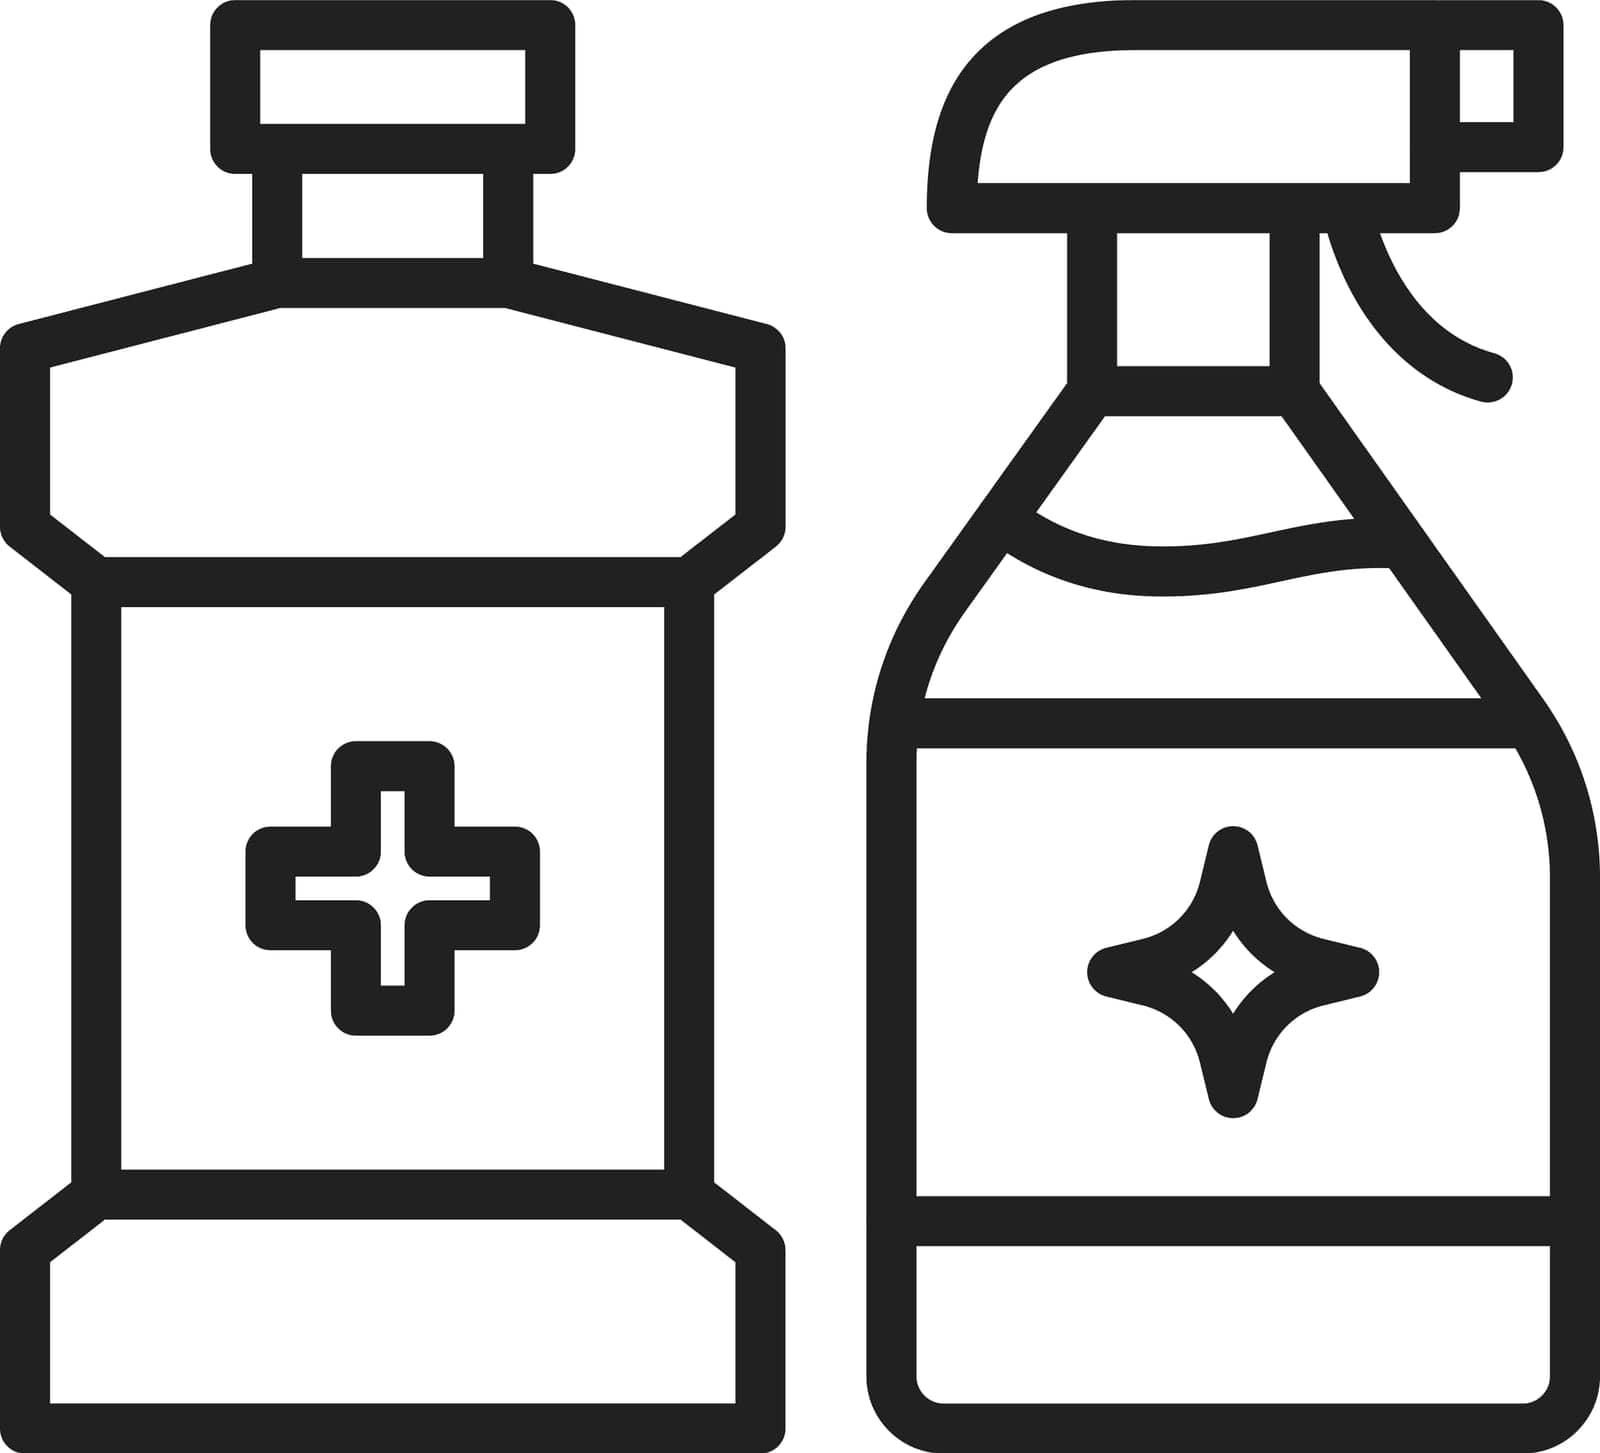 Hygiene Products Icon image. Suitable for mobile application.